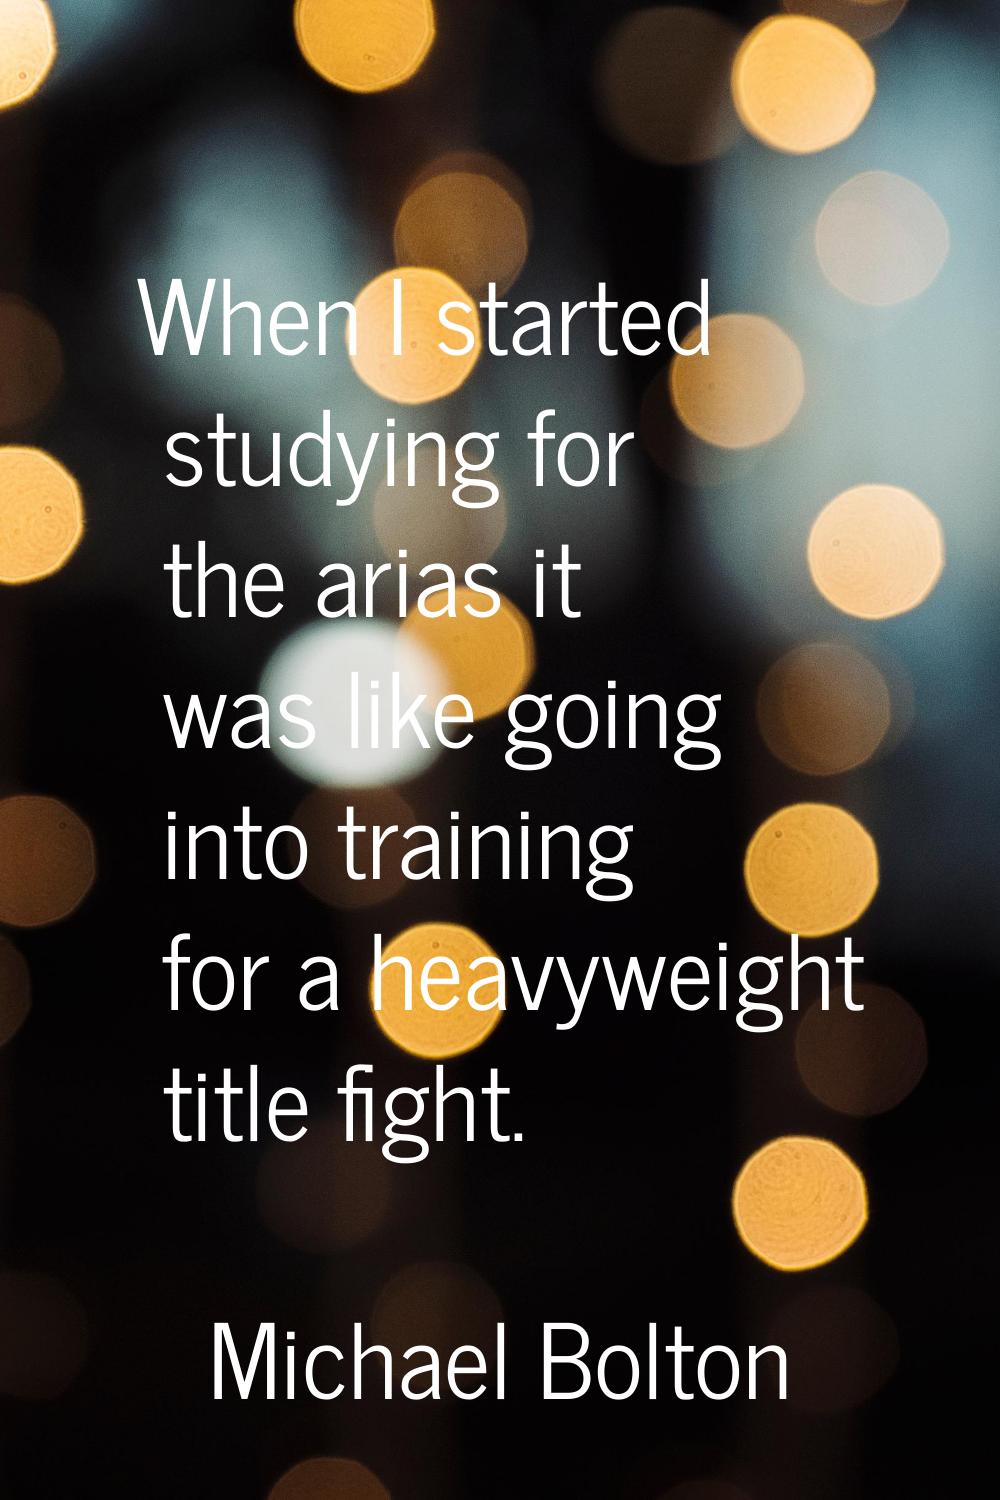 When I started studying for the arias it was like going into training for a heavyweight title fight